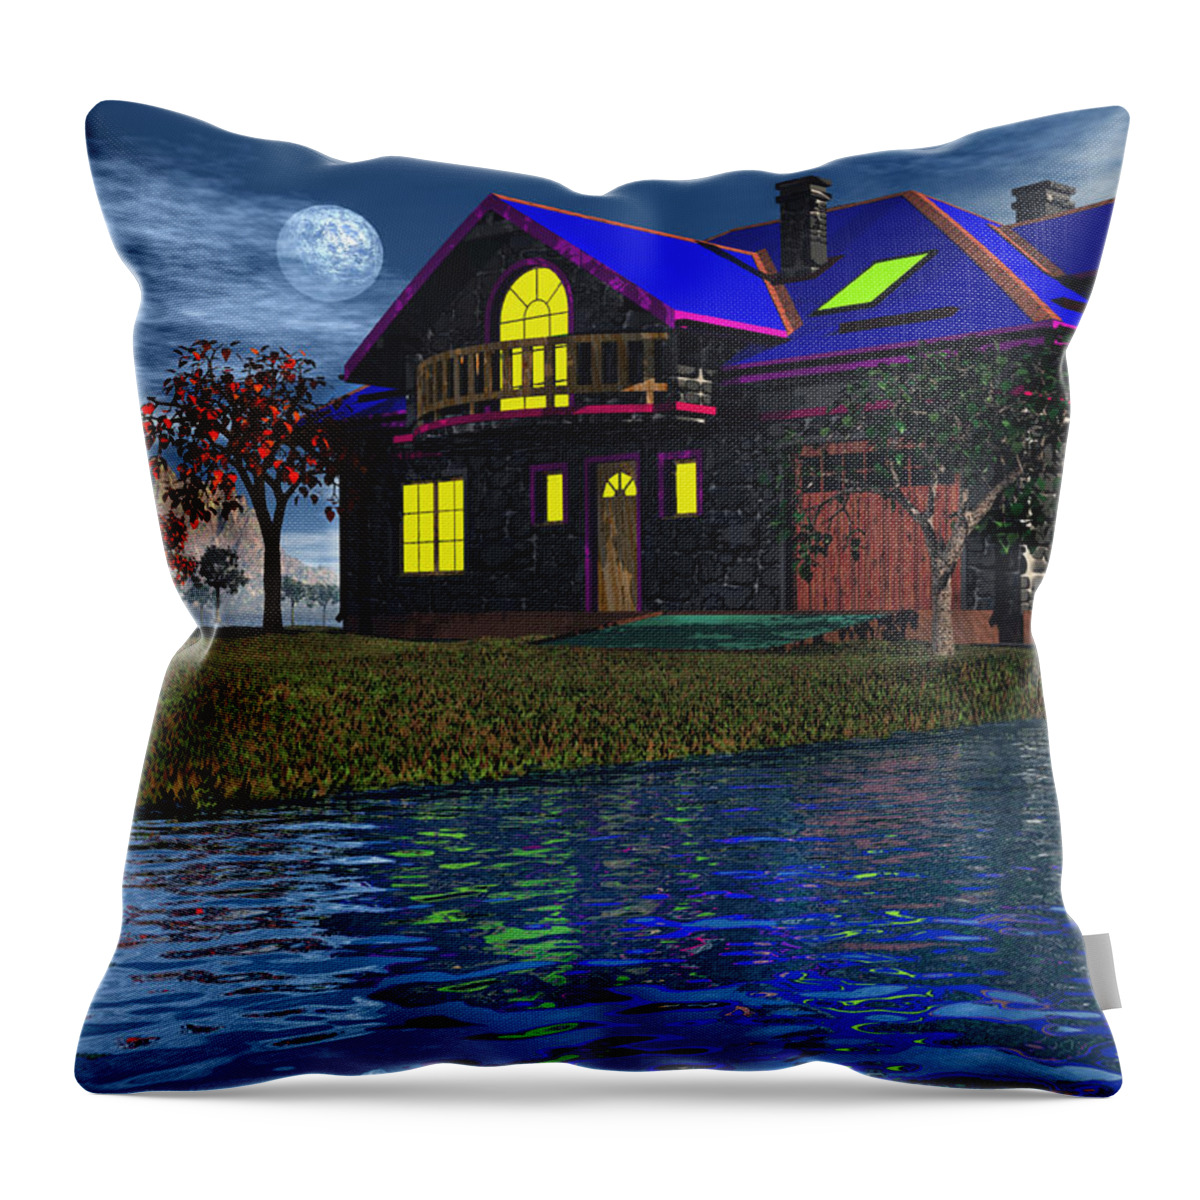 House Throw Pillow featuring the photograph House By The River by Mark Blauhoefer